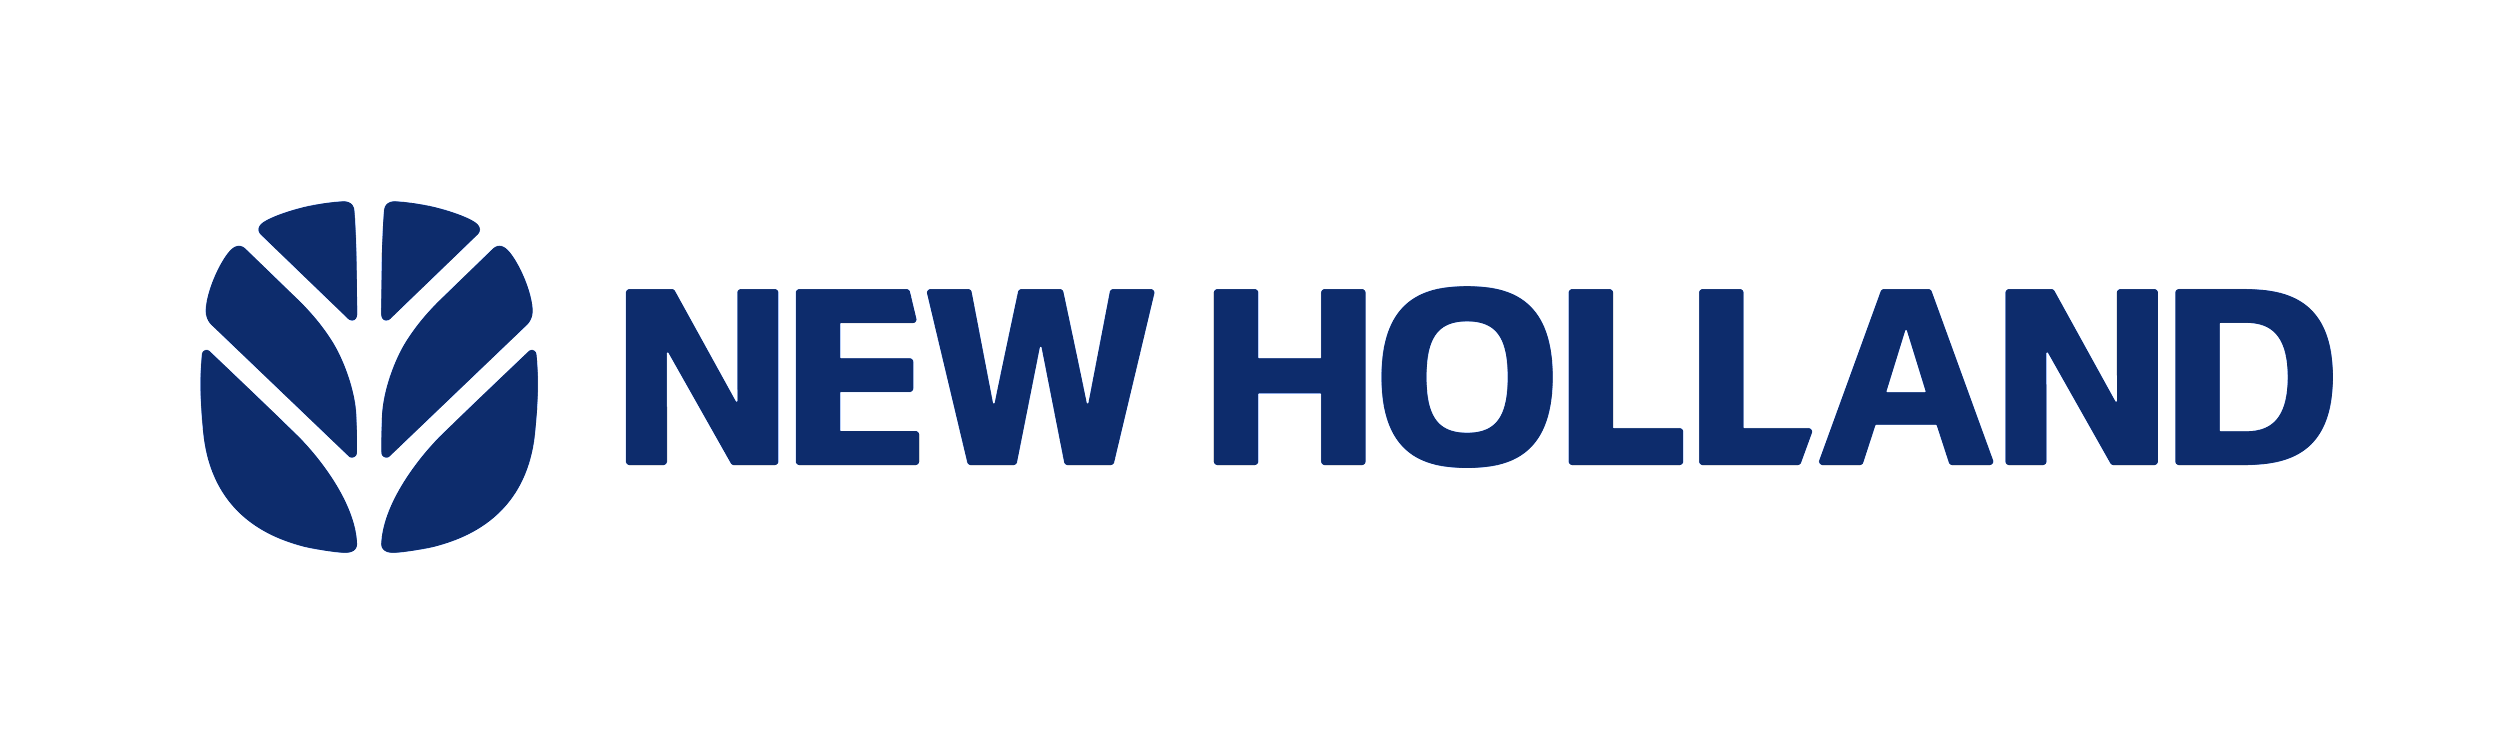 New Holland agriculture